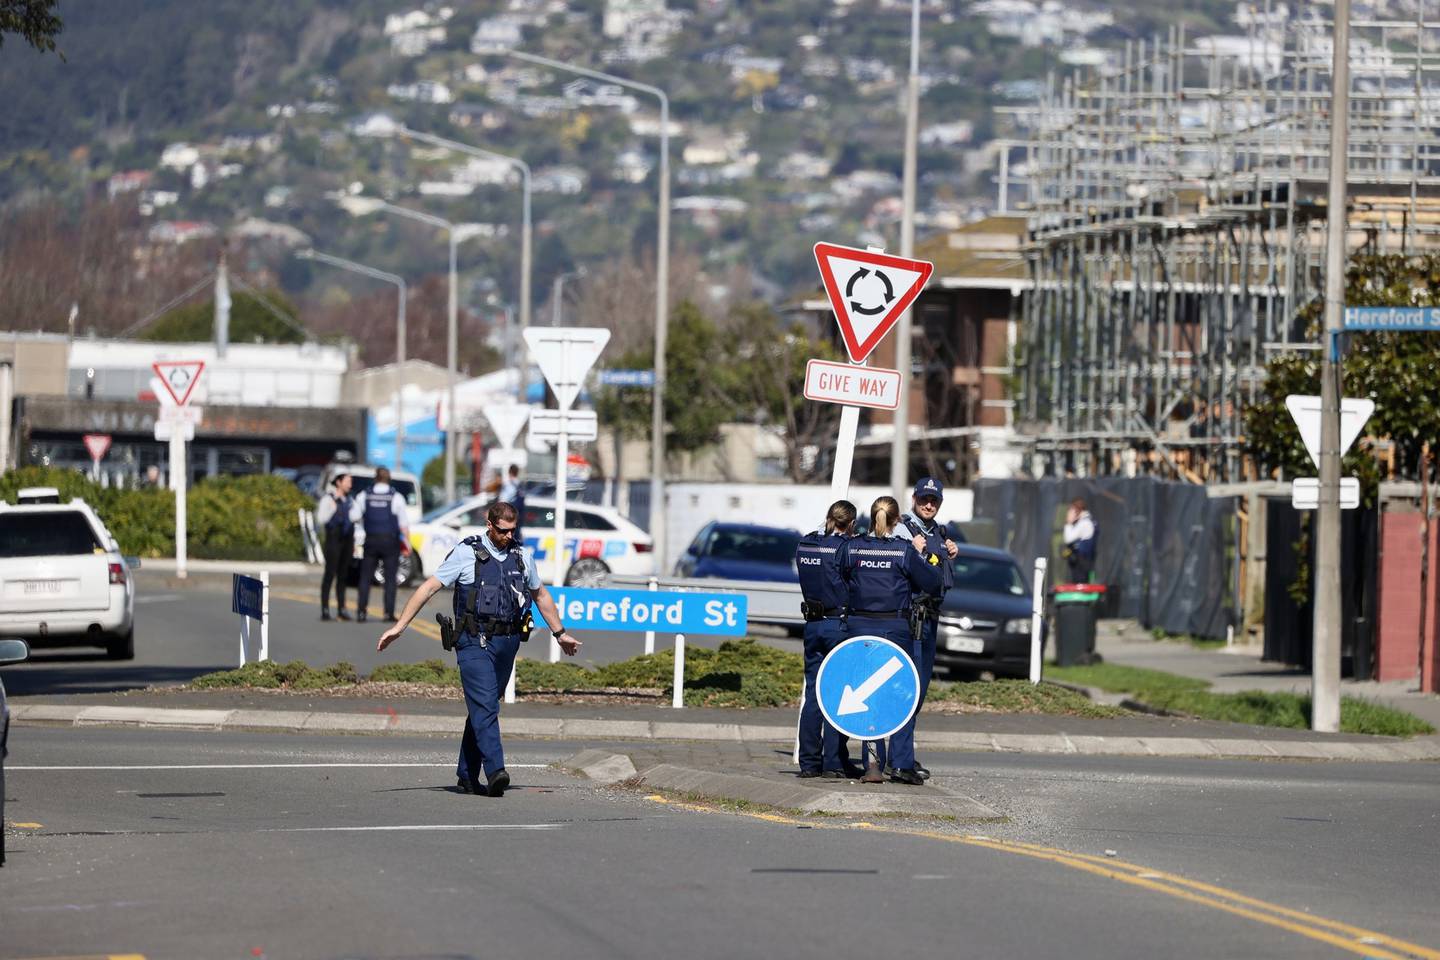 Drive-by shooting: Police manhunt after person suffered two gunshot wounds  - NZ Herald